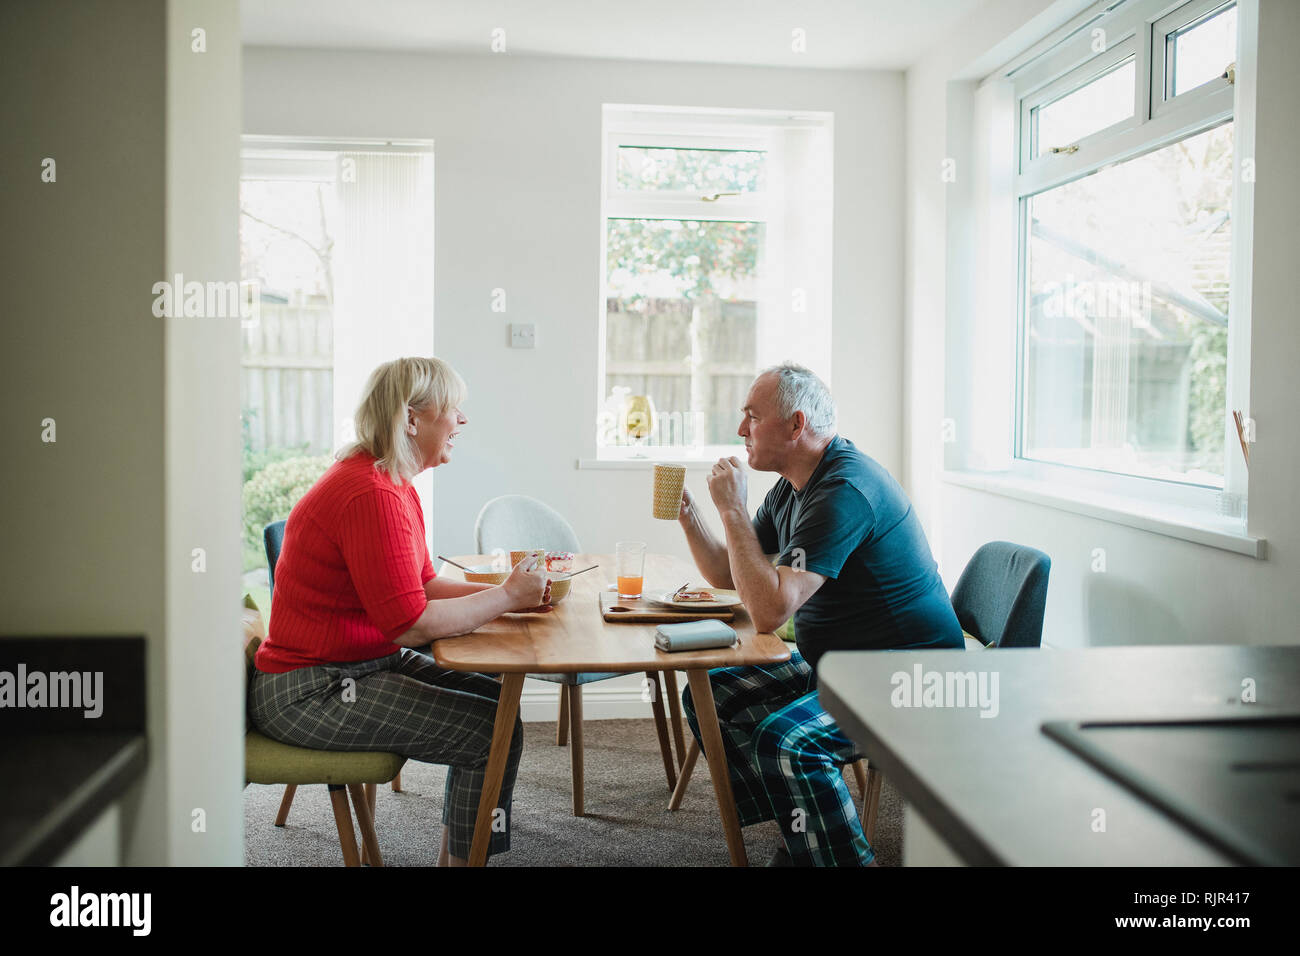 Mature couple are having breakfast together at the dining table in their home. Stock Photo